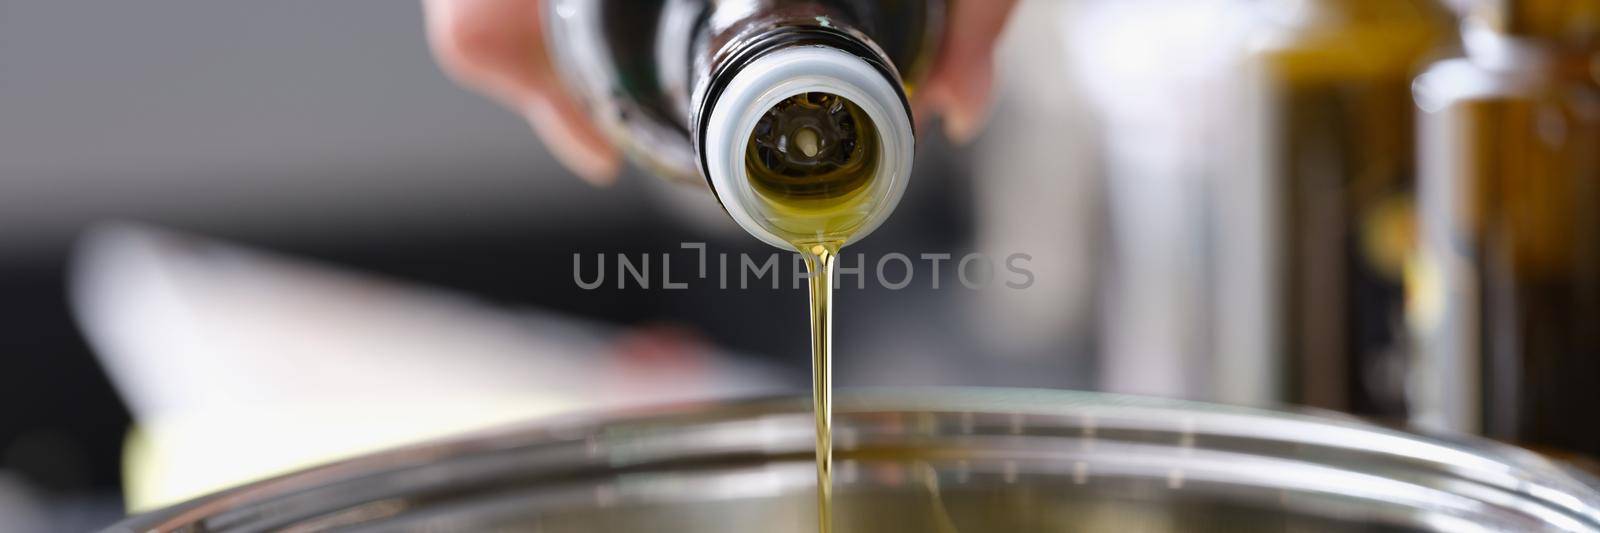 Olive oil is poured from a bottle into a saucepan, close-up. Healthy Cooking, antioxidants. Cholesterol protection